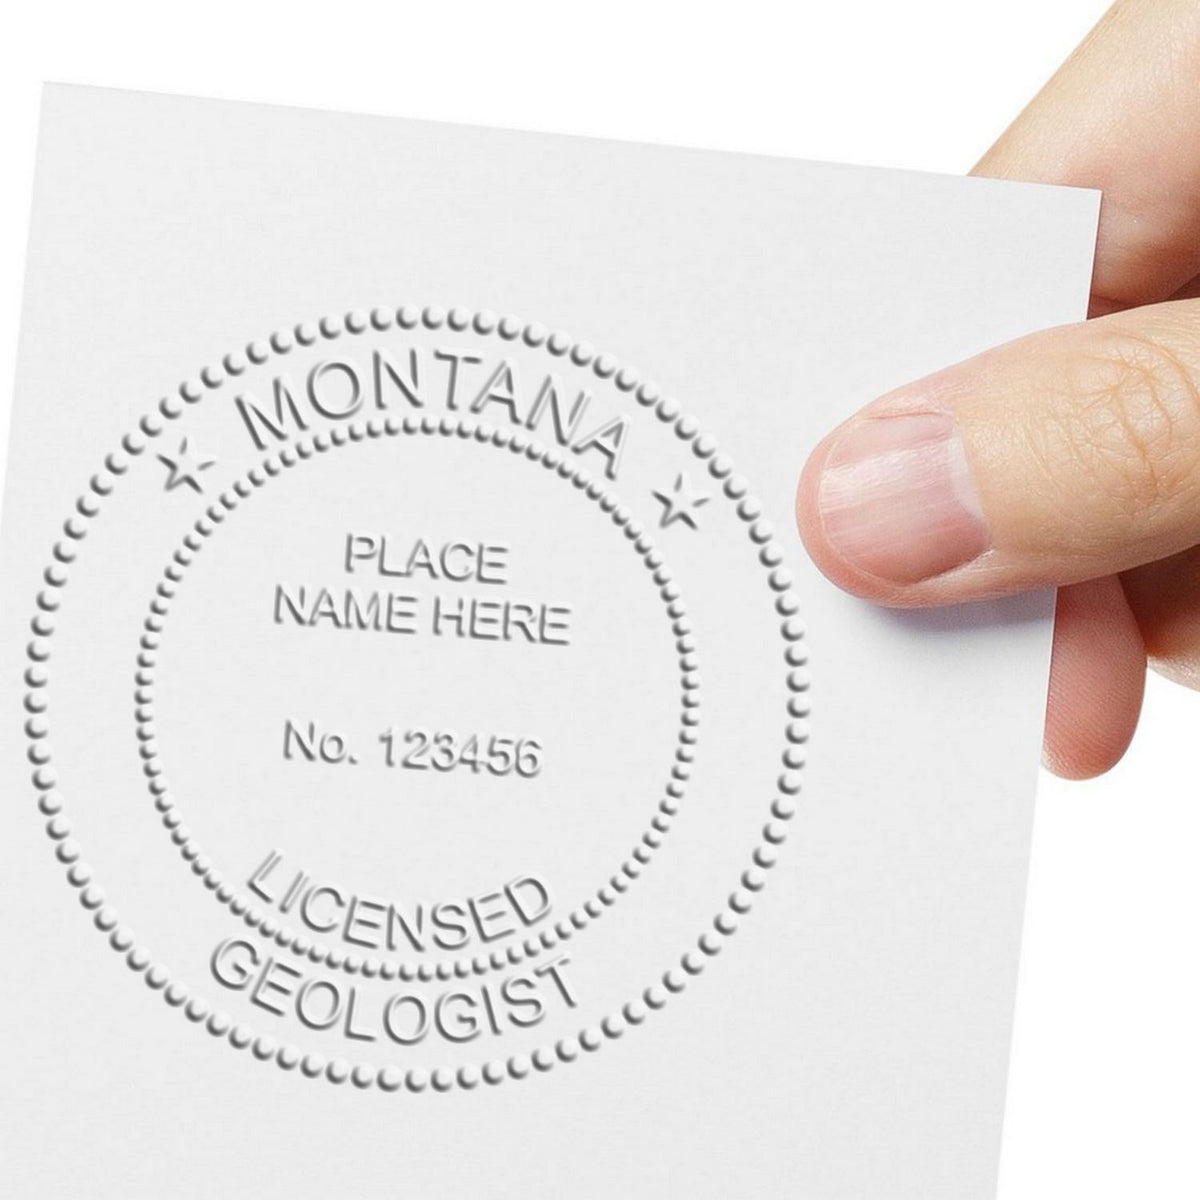 An alternative view of the State of Montana Extended Long Reach Geologist Seal stamped on a sheet of paper showing the image in use